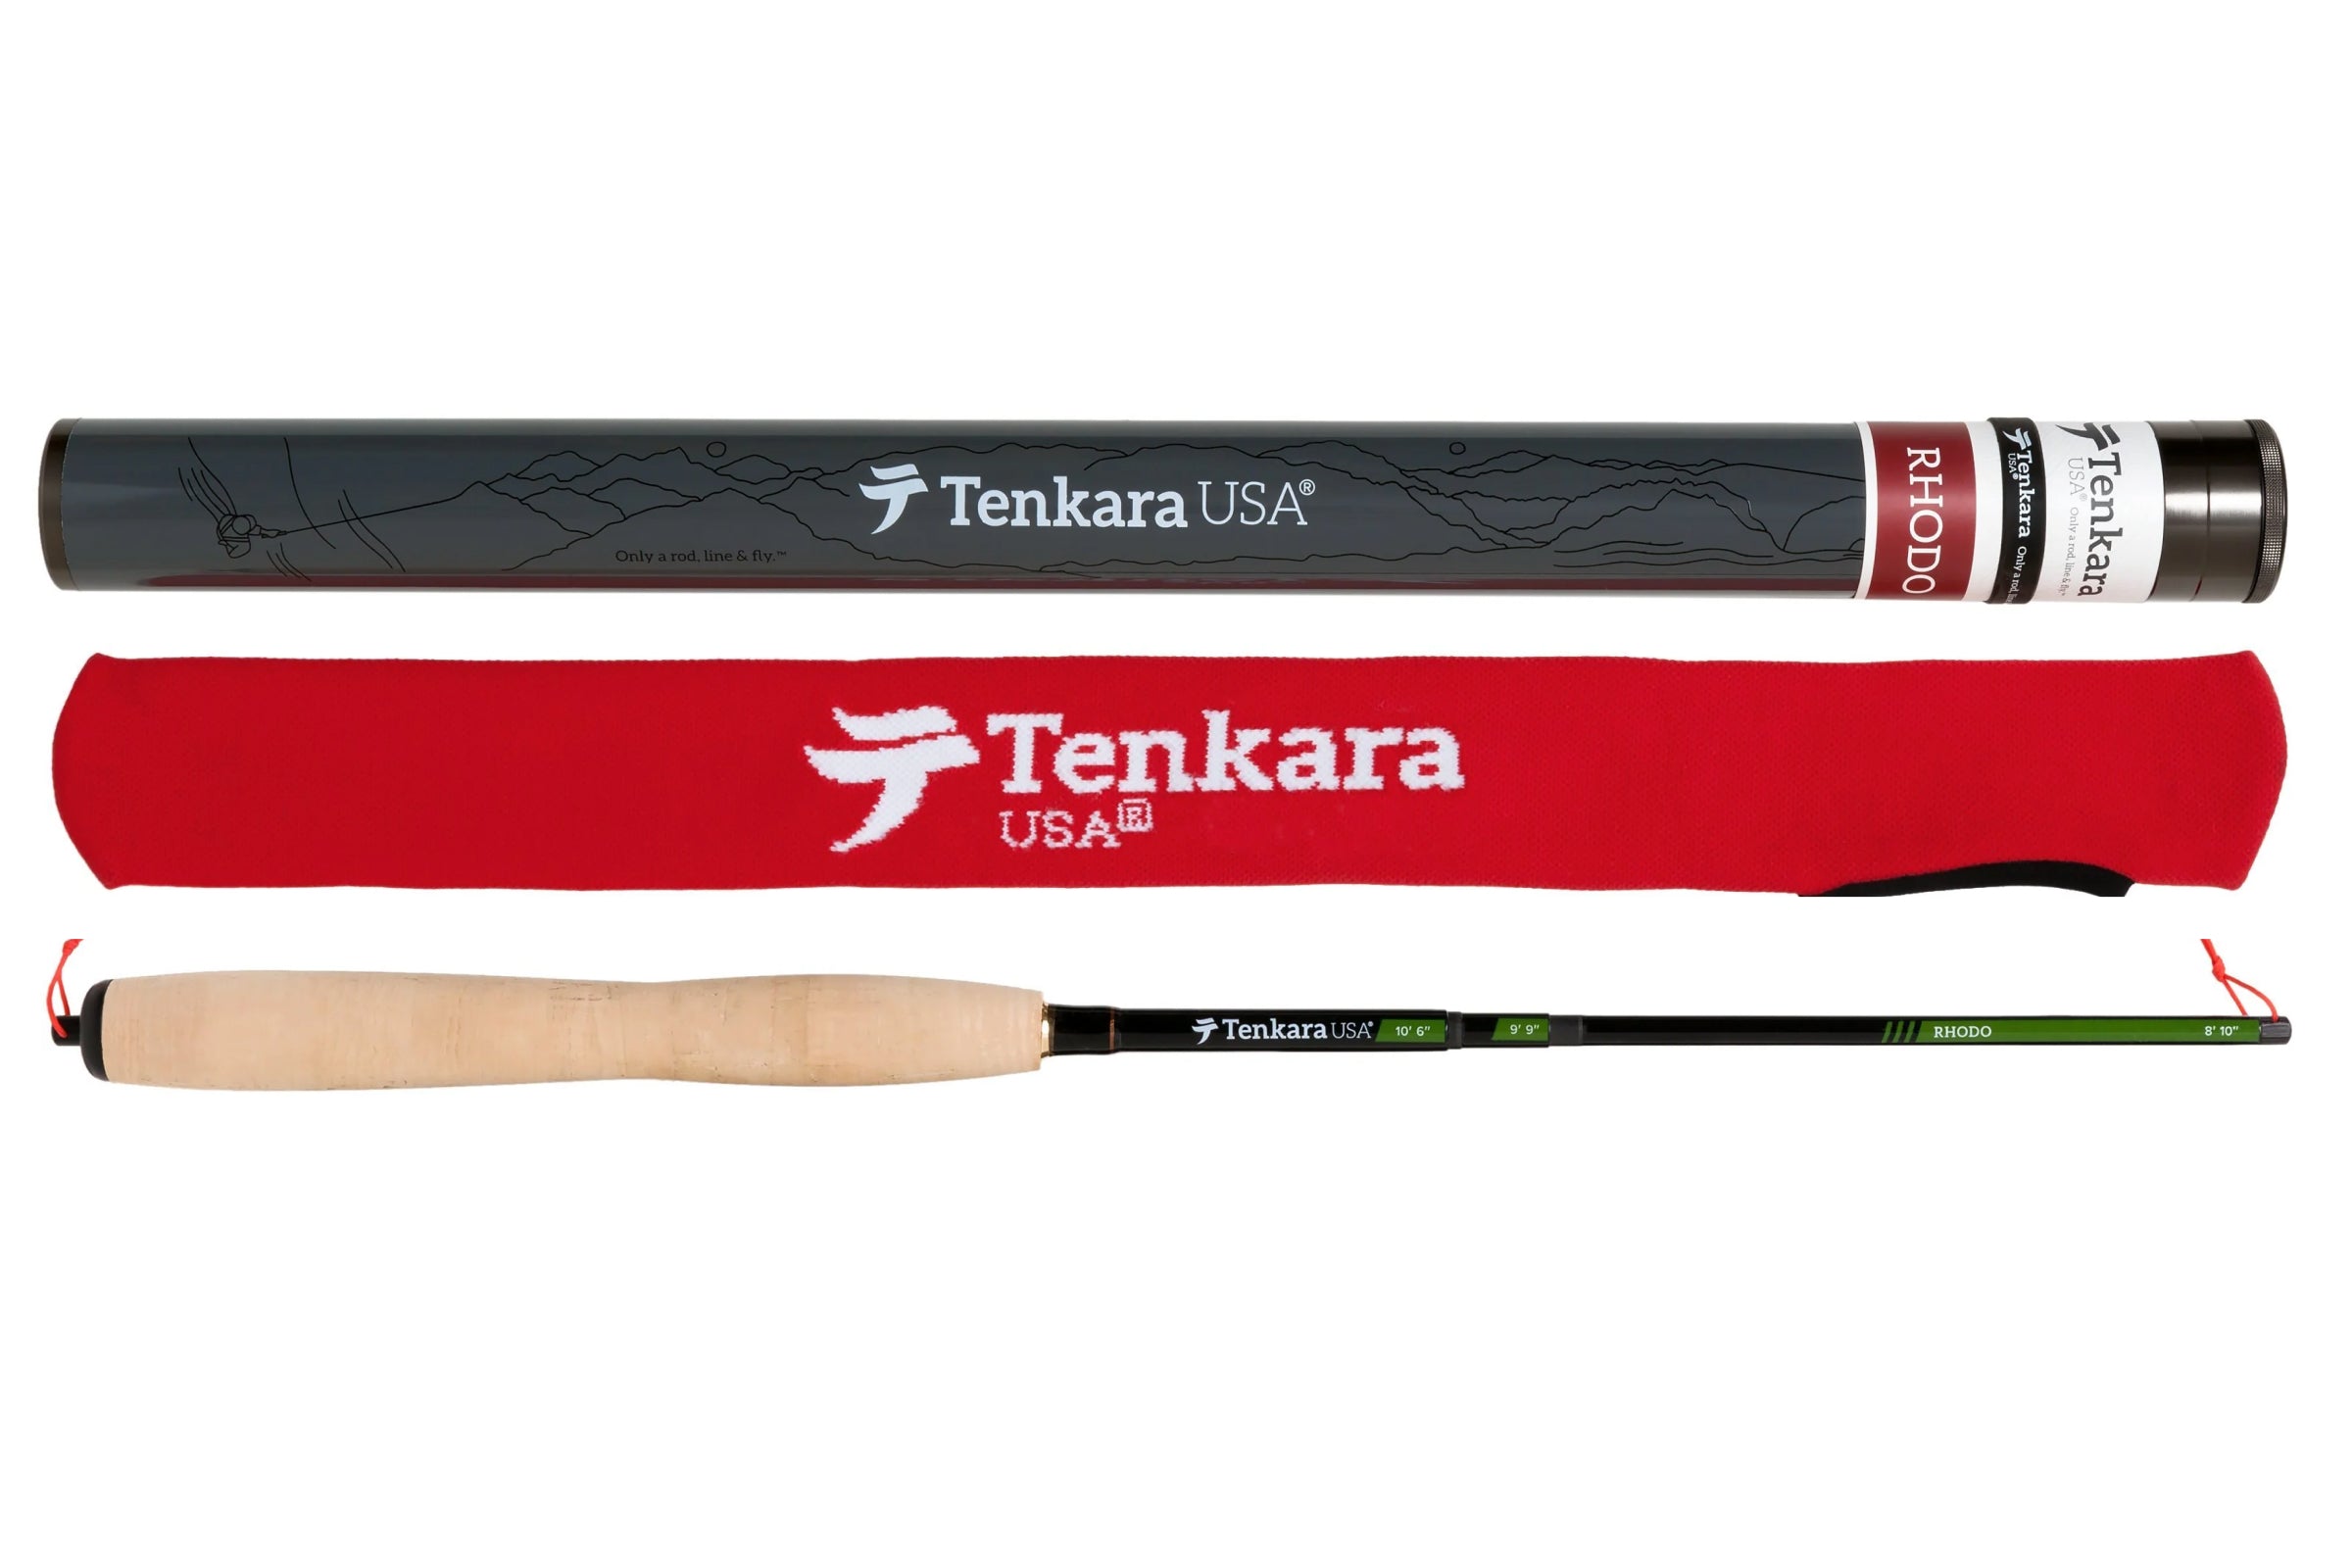 tenkara fishing rods, tenkara fishing rods Suppliers and